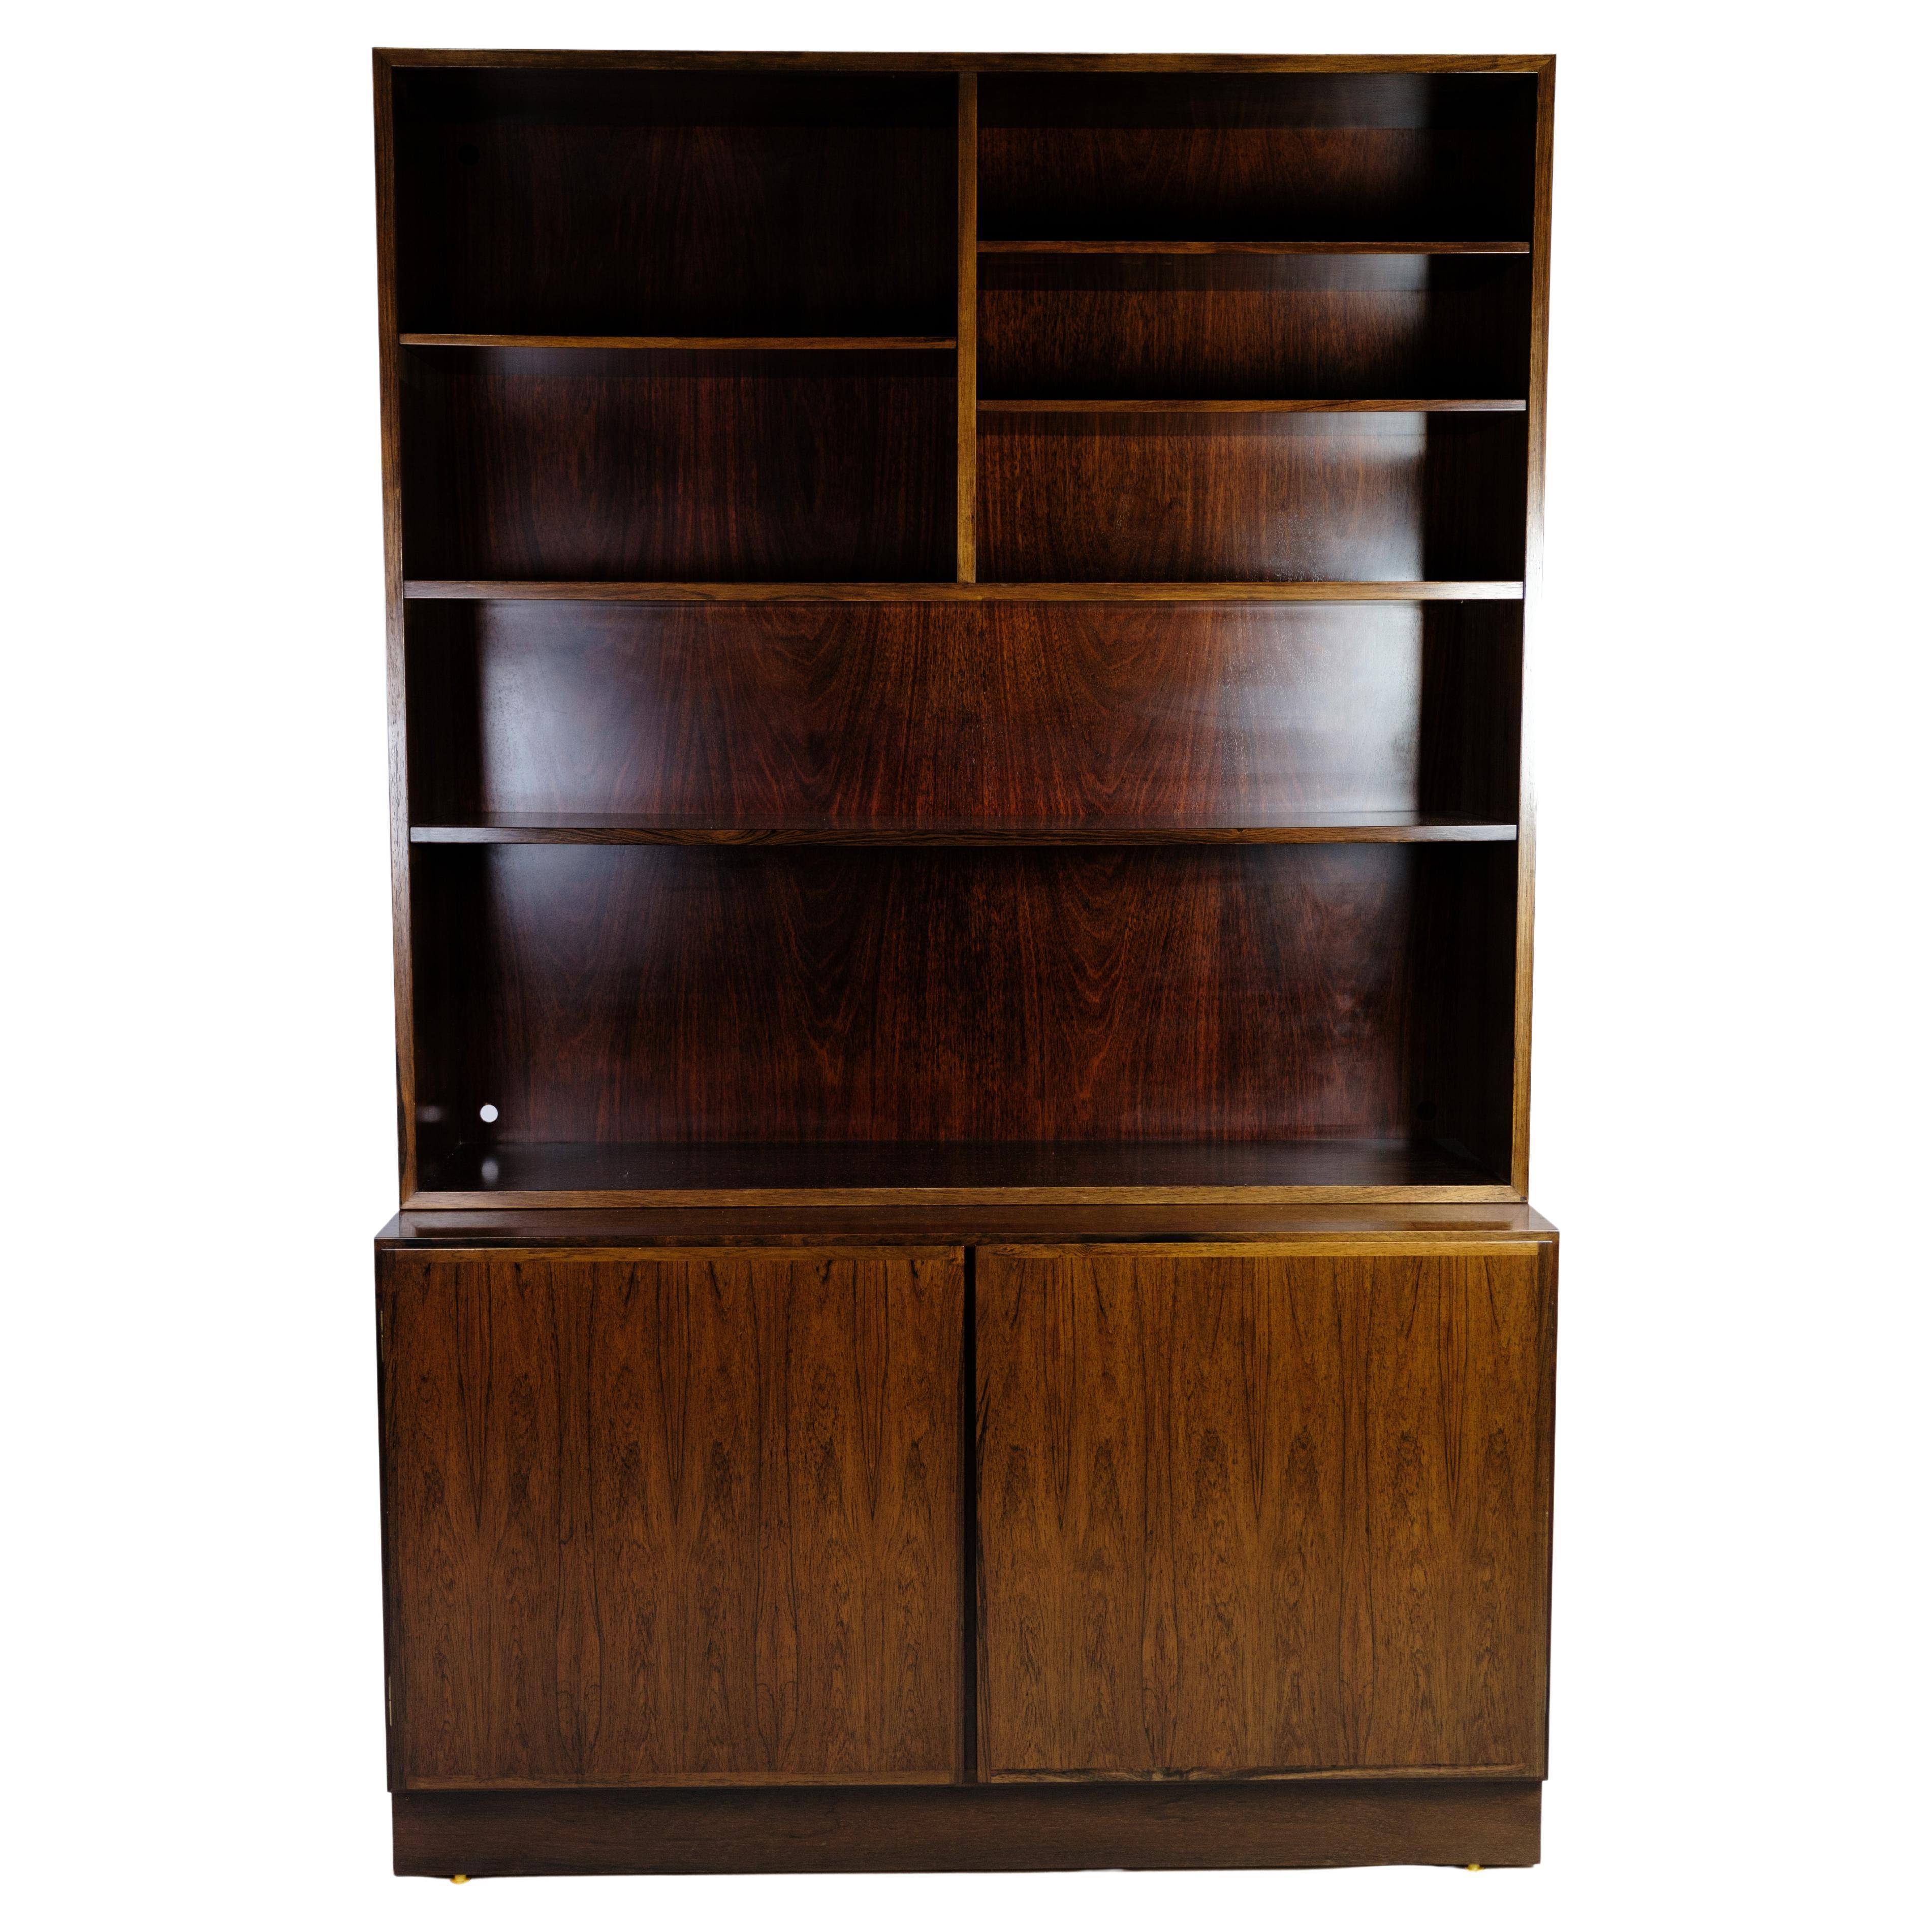 Shelving System Model 9 Made In Rosewood By Omann Juniors Møbelfabrik From 1960s